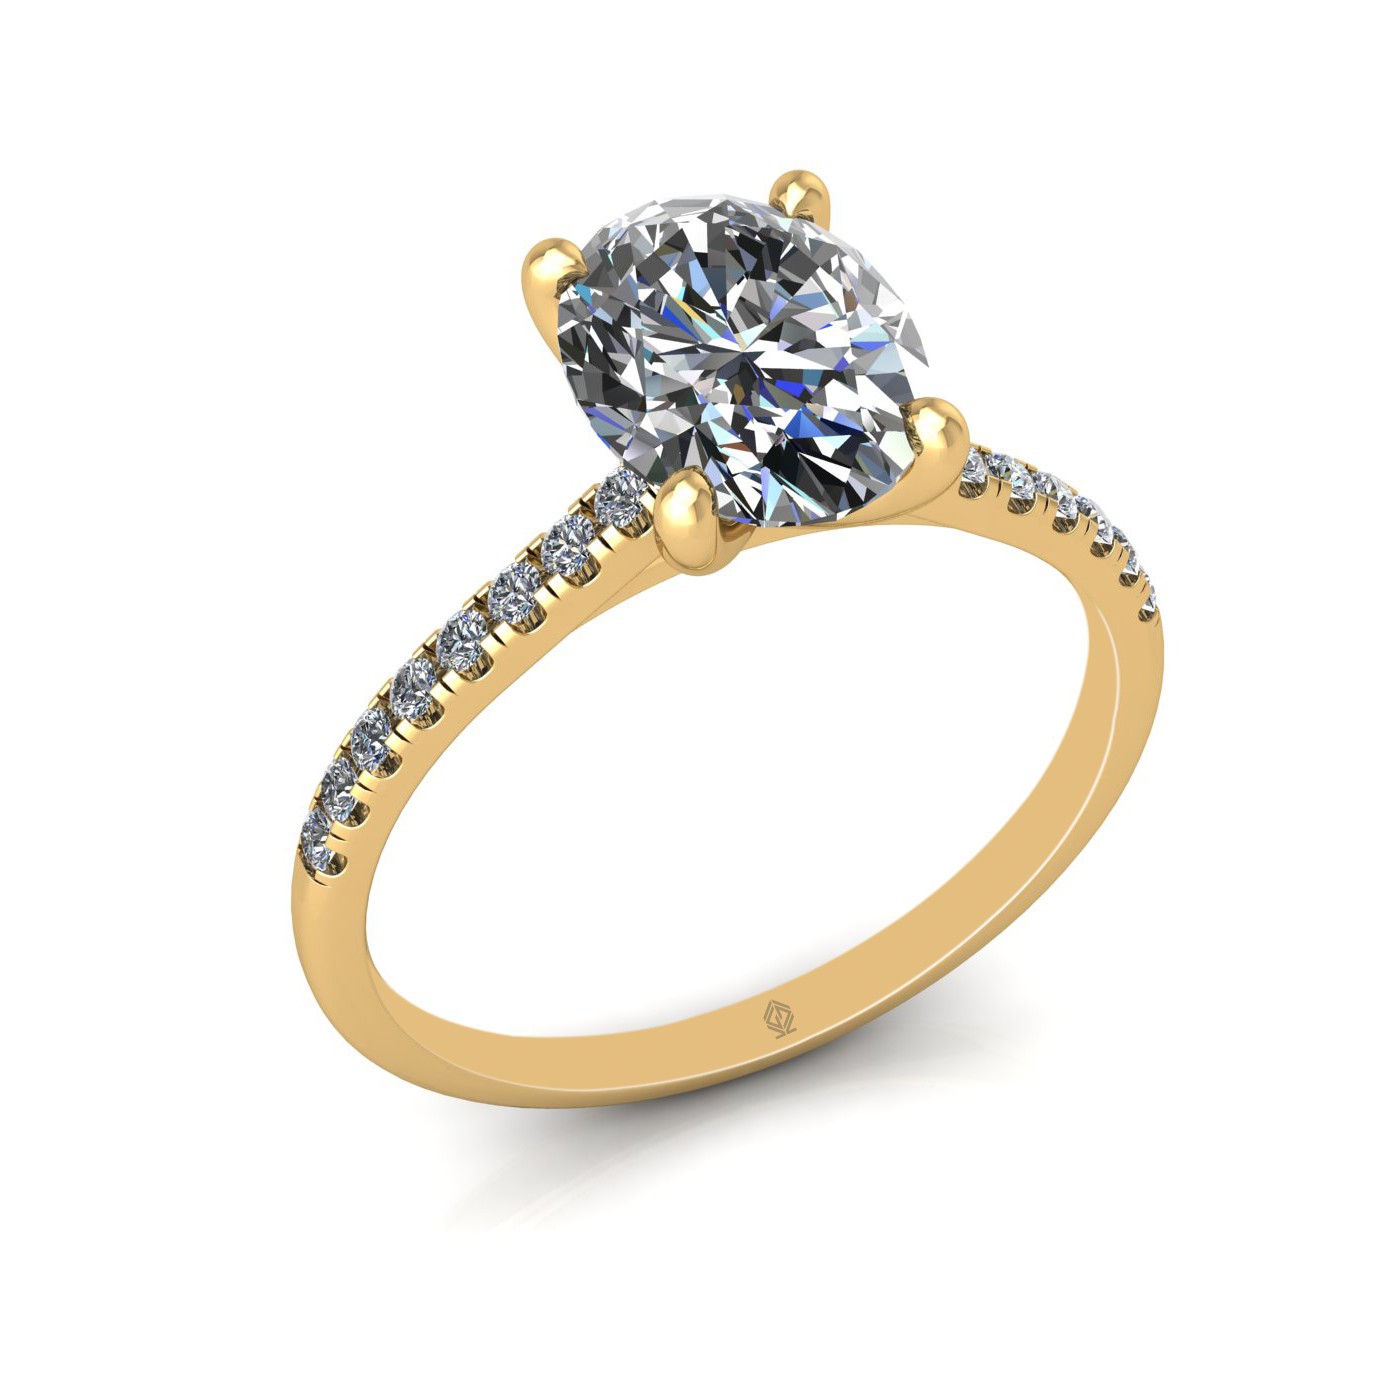 18k yellow gold  1,50 ct 4 prongs oval cut diamond engagement ring with whisper thin pavÉ set band Photos & images